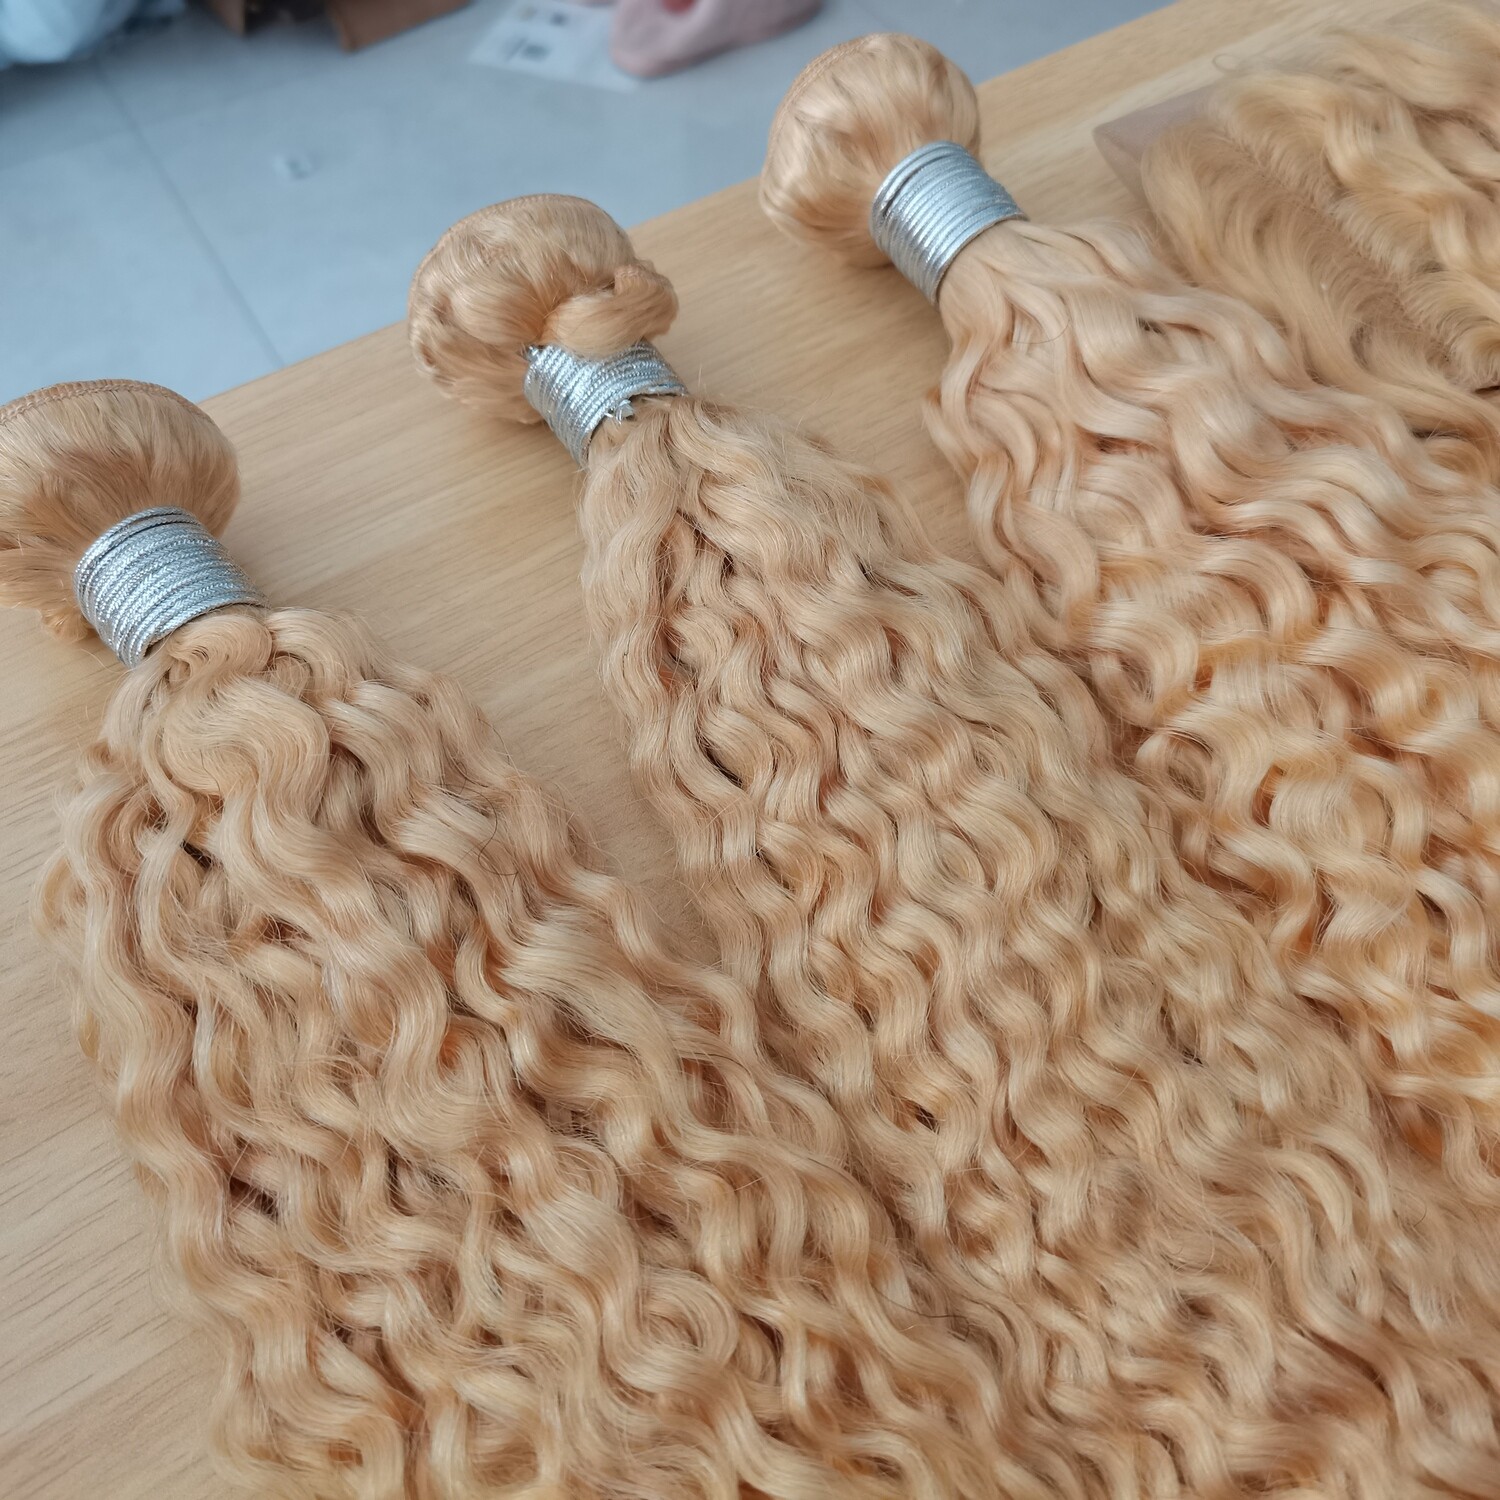 Best grade 613 blonde human hair curly hair bundles, 10 inches to 40 inches, $100 to $590.